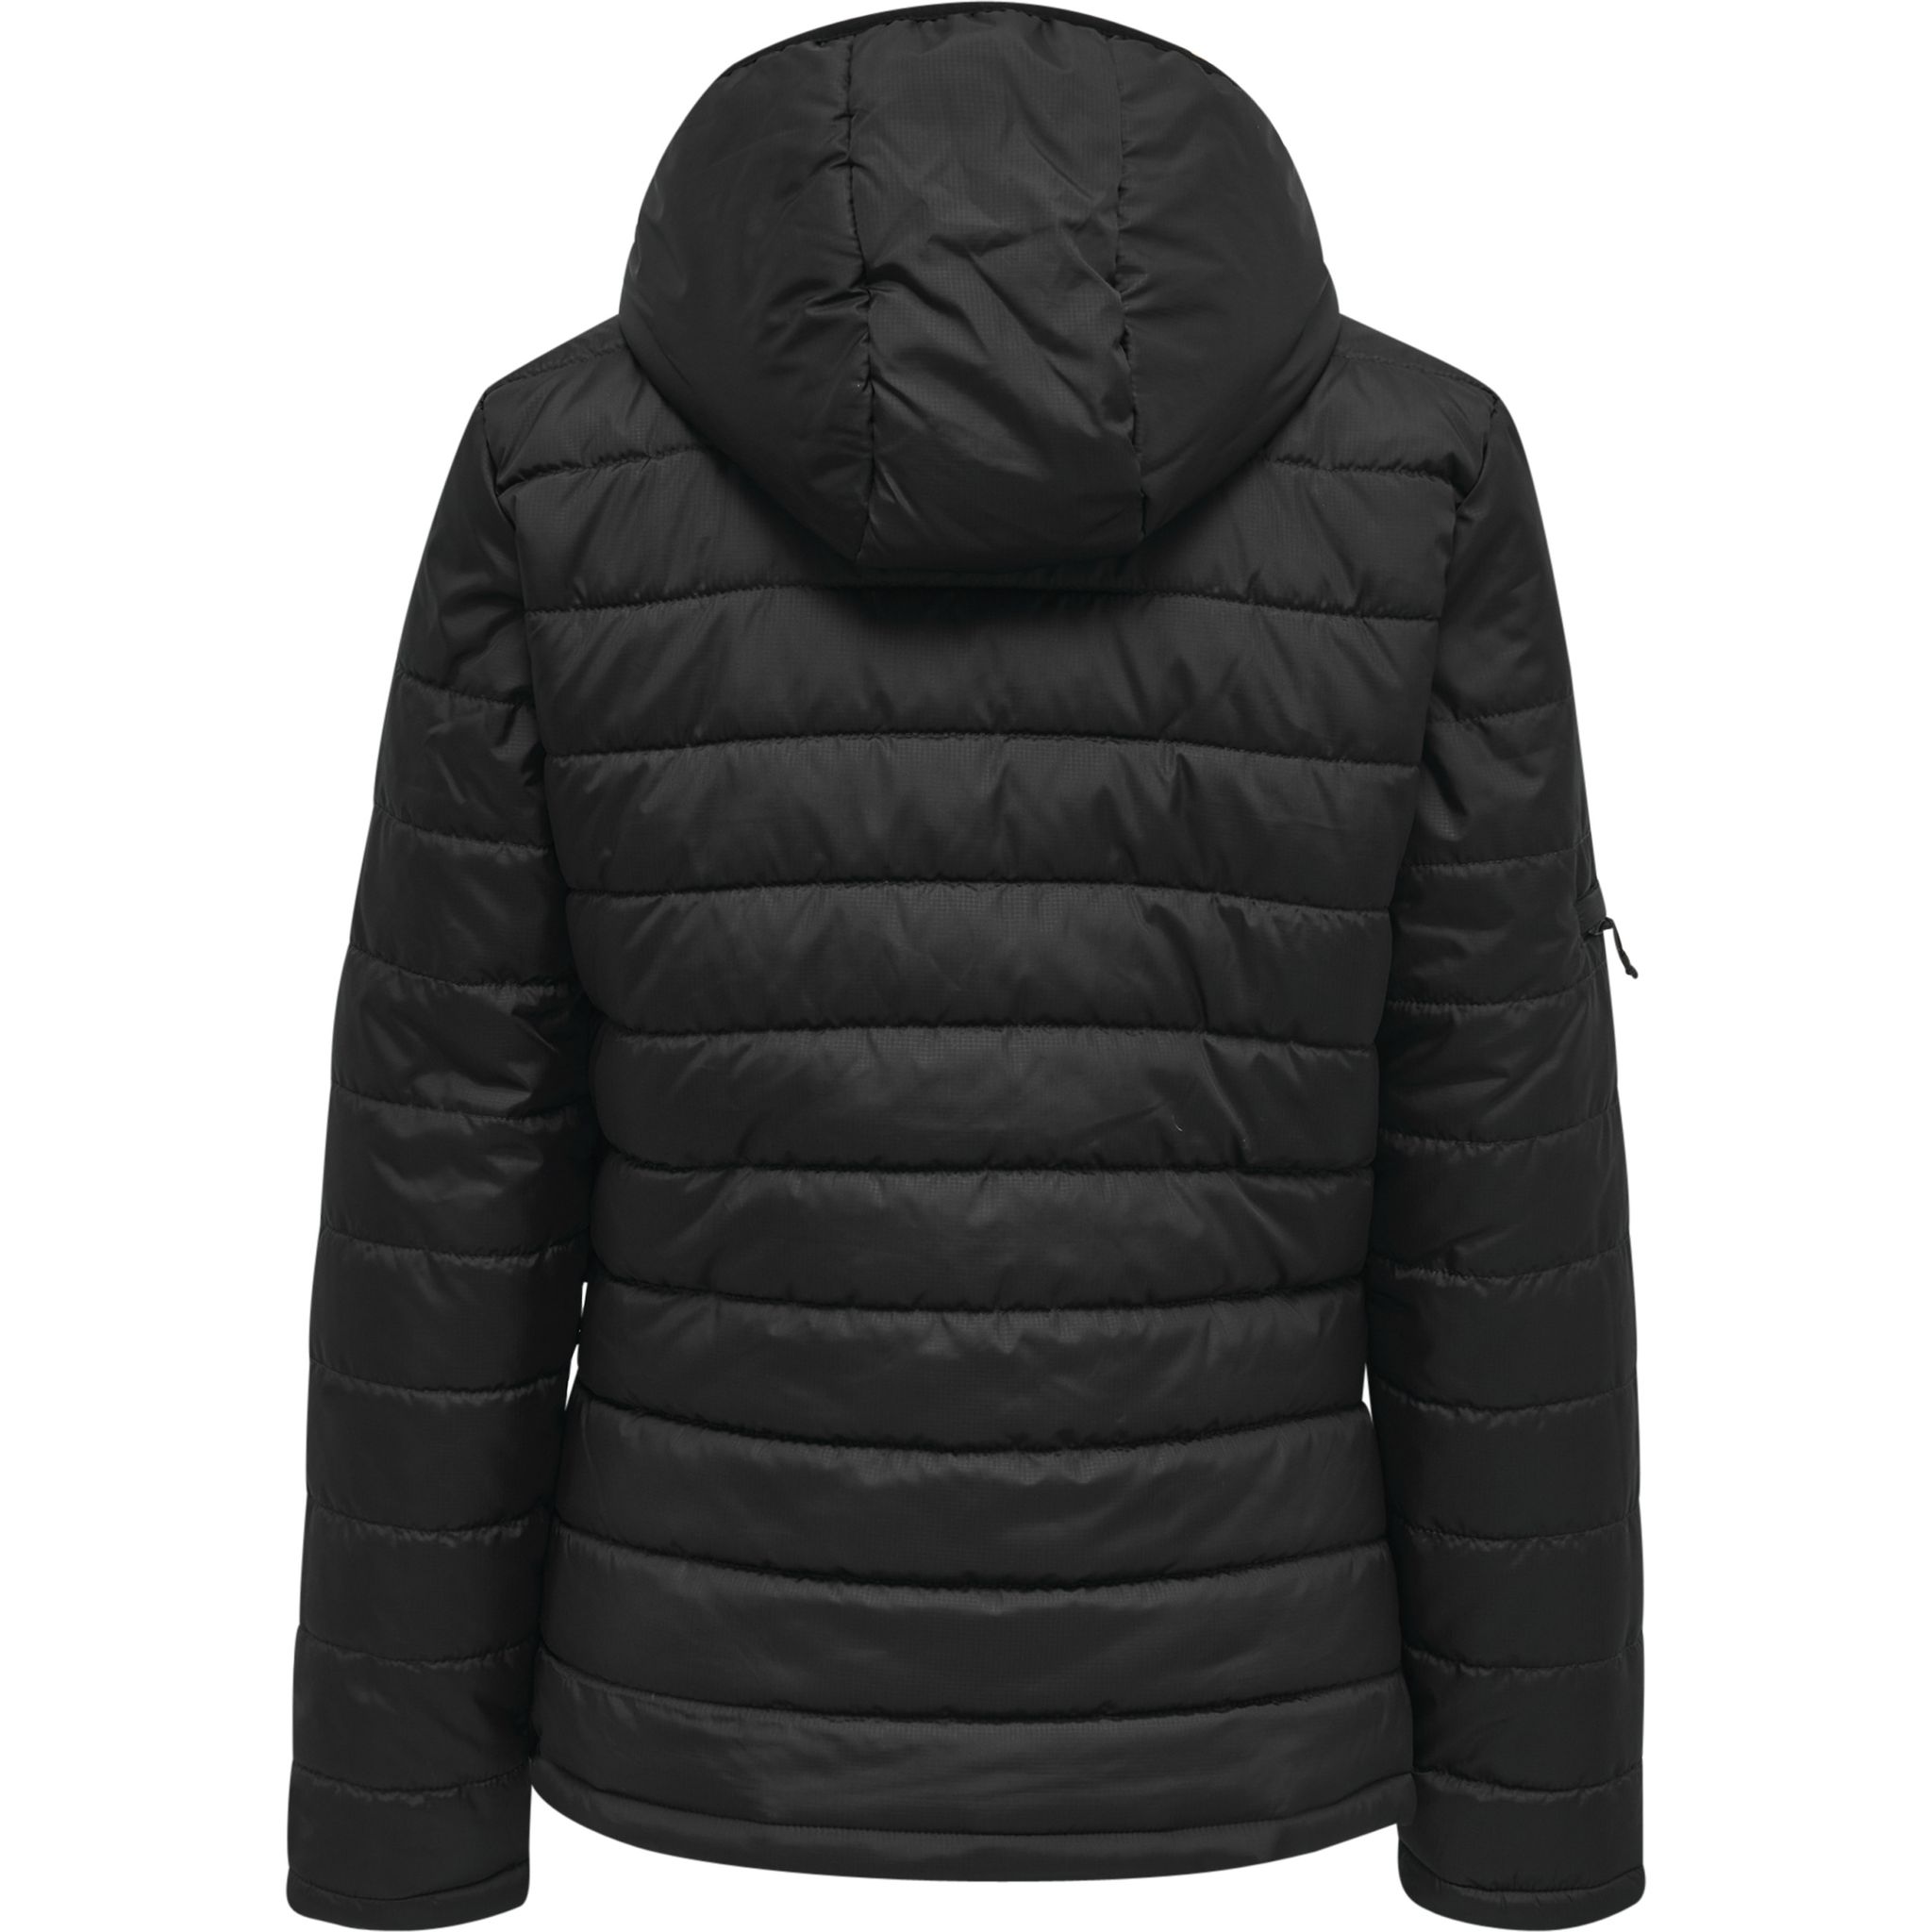 HMLNORTH QUILTED HOOD JACKET WOMAN